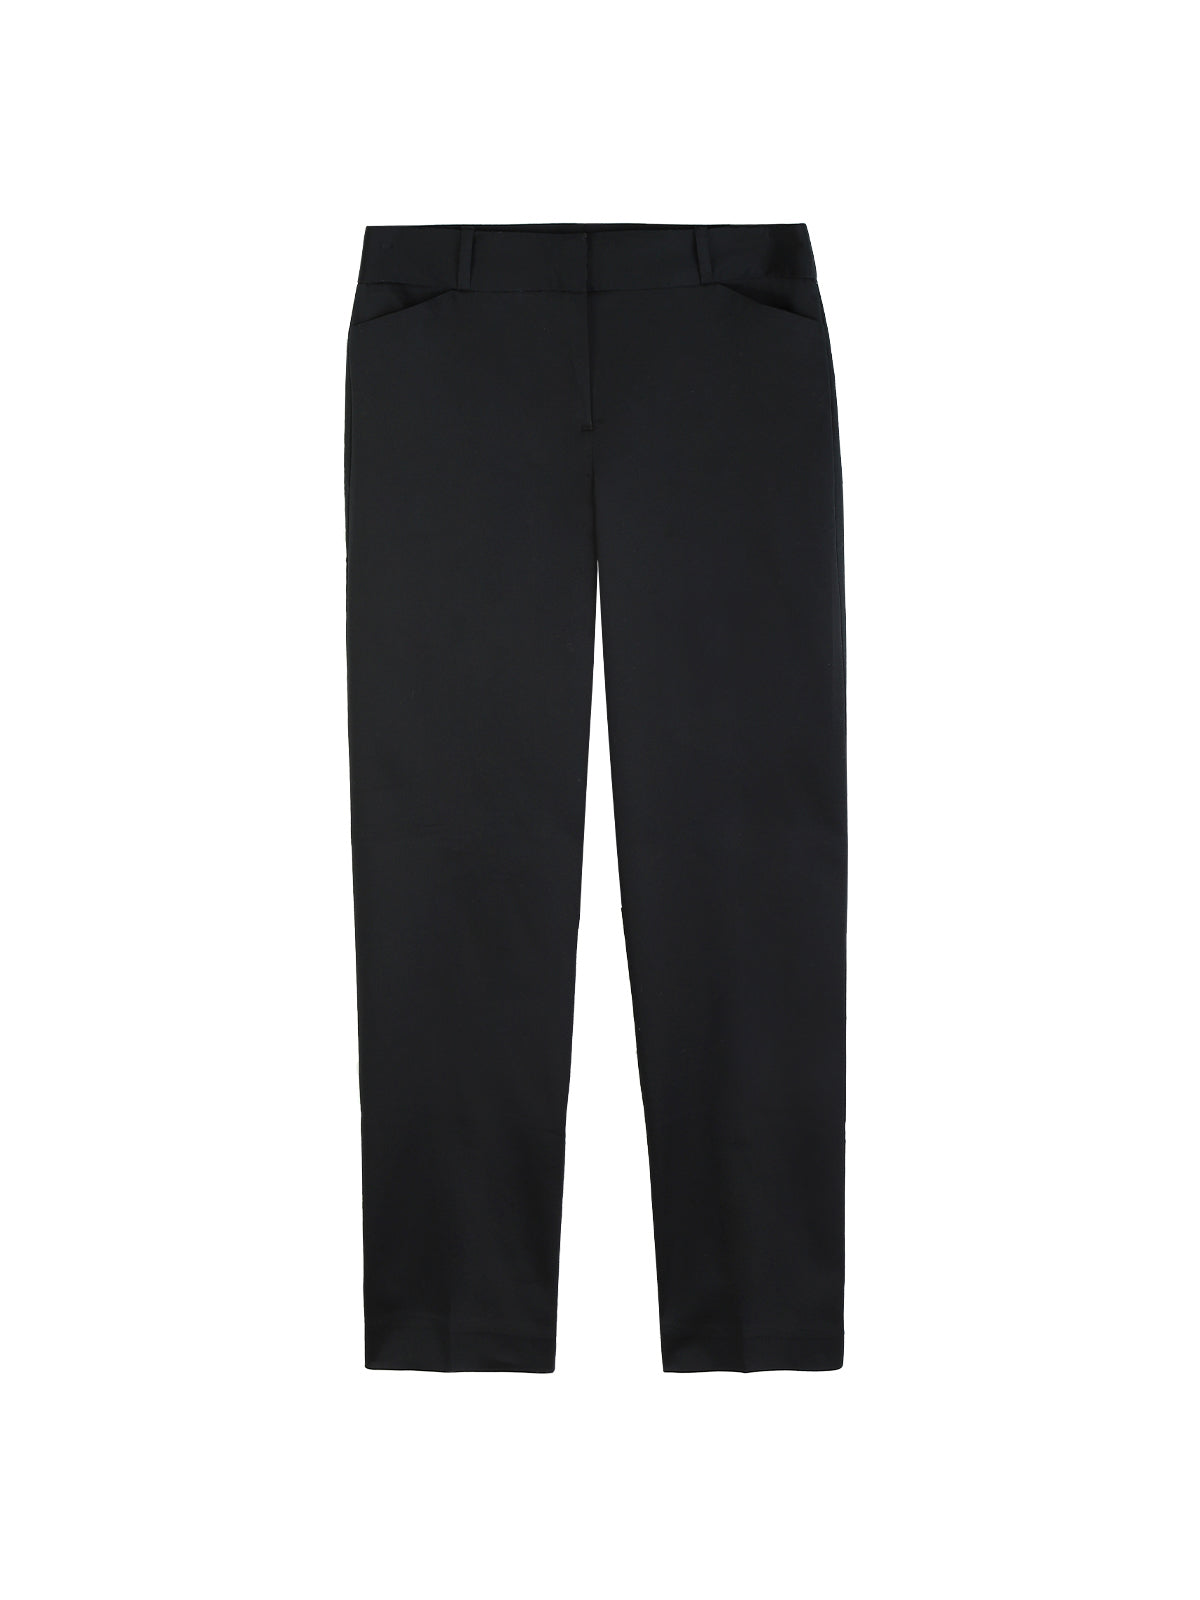 Sateen Ankle Pants